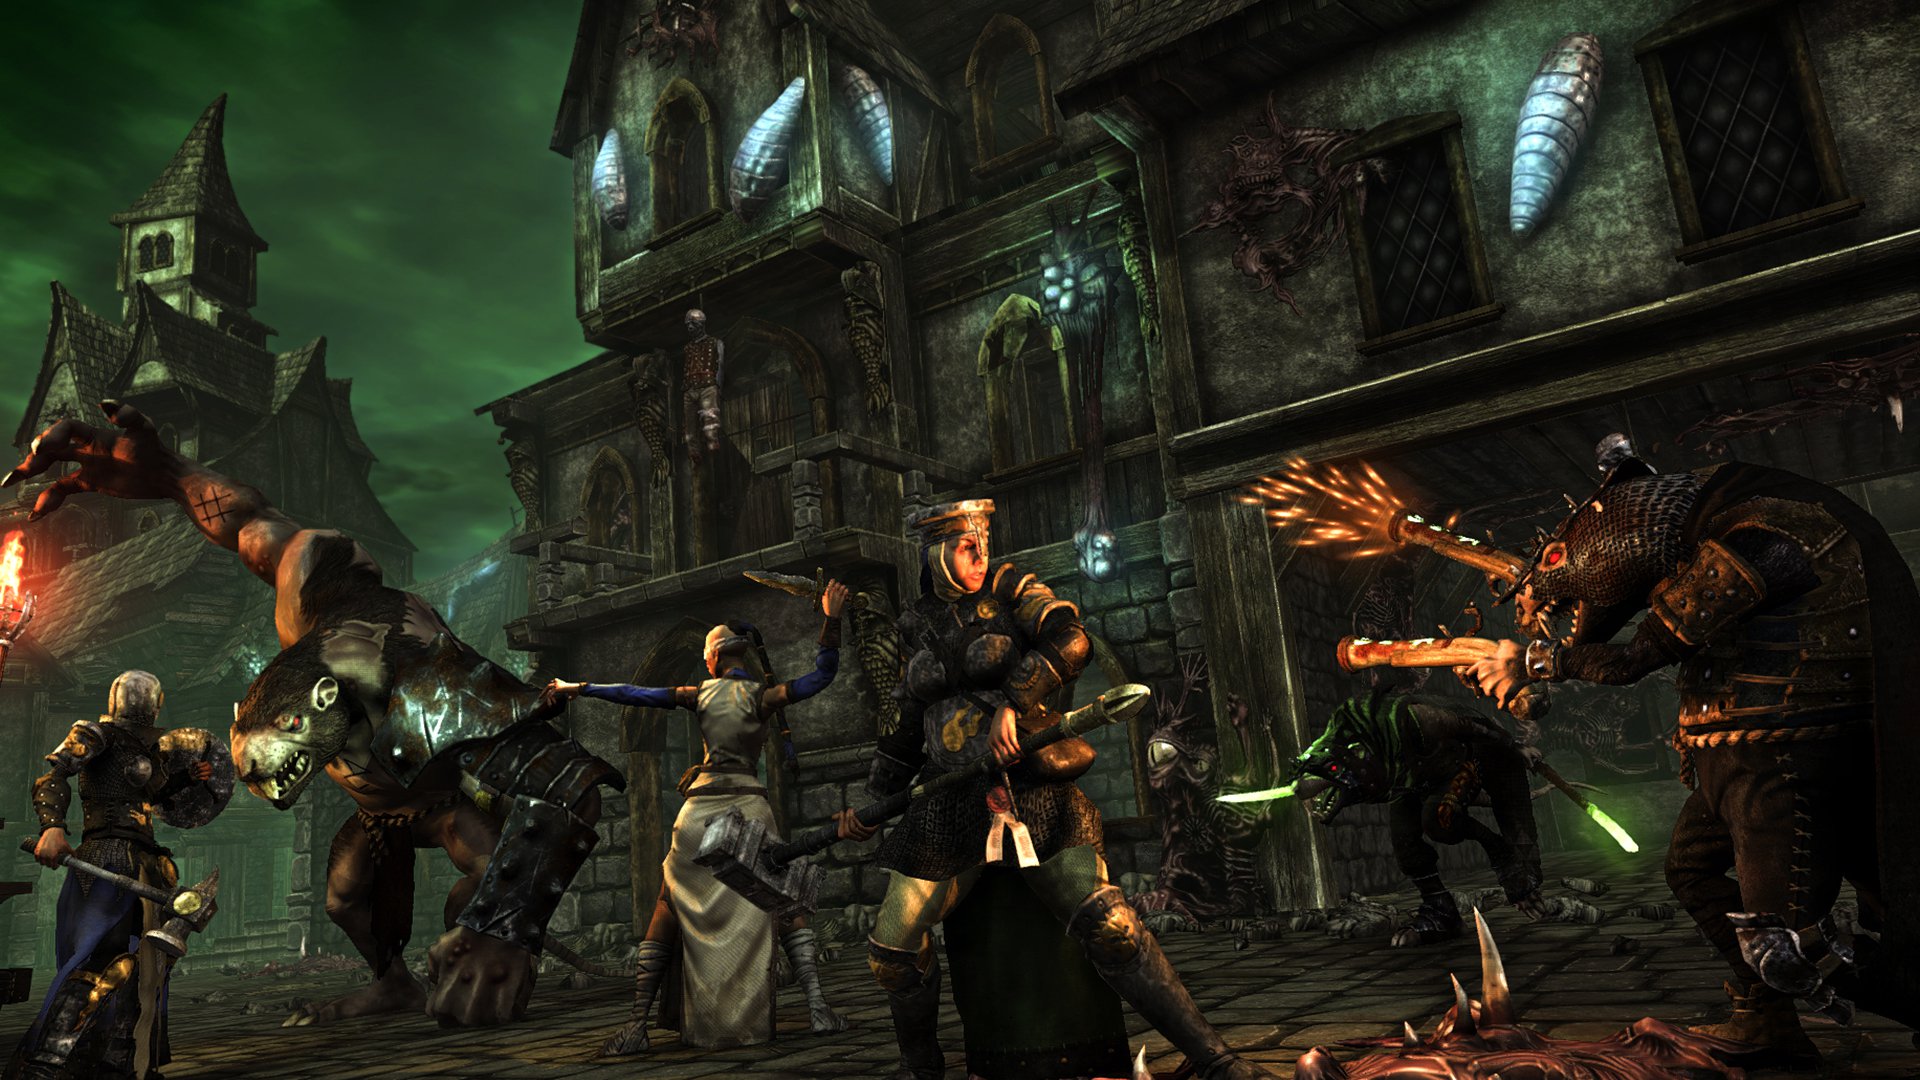 Mordheim City of the Damned 3